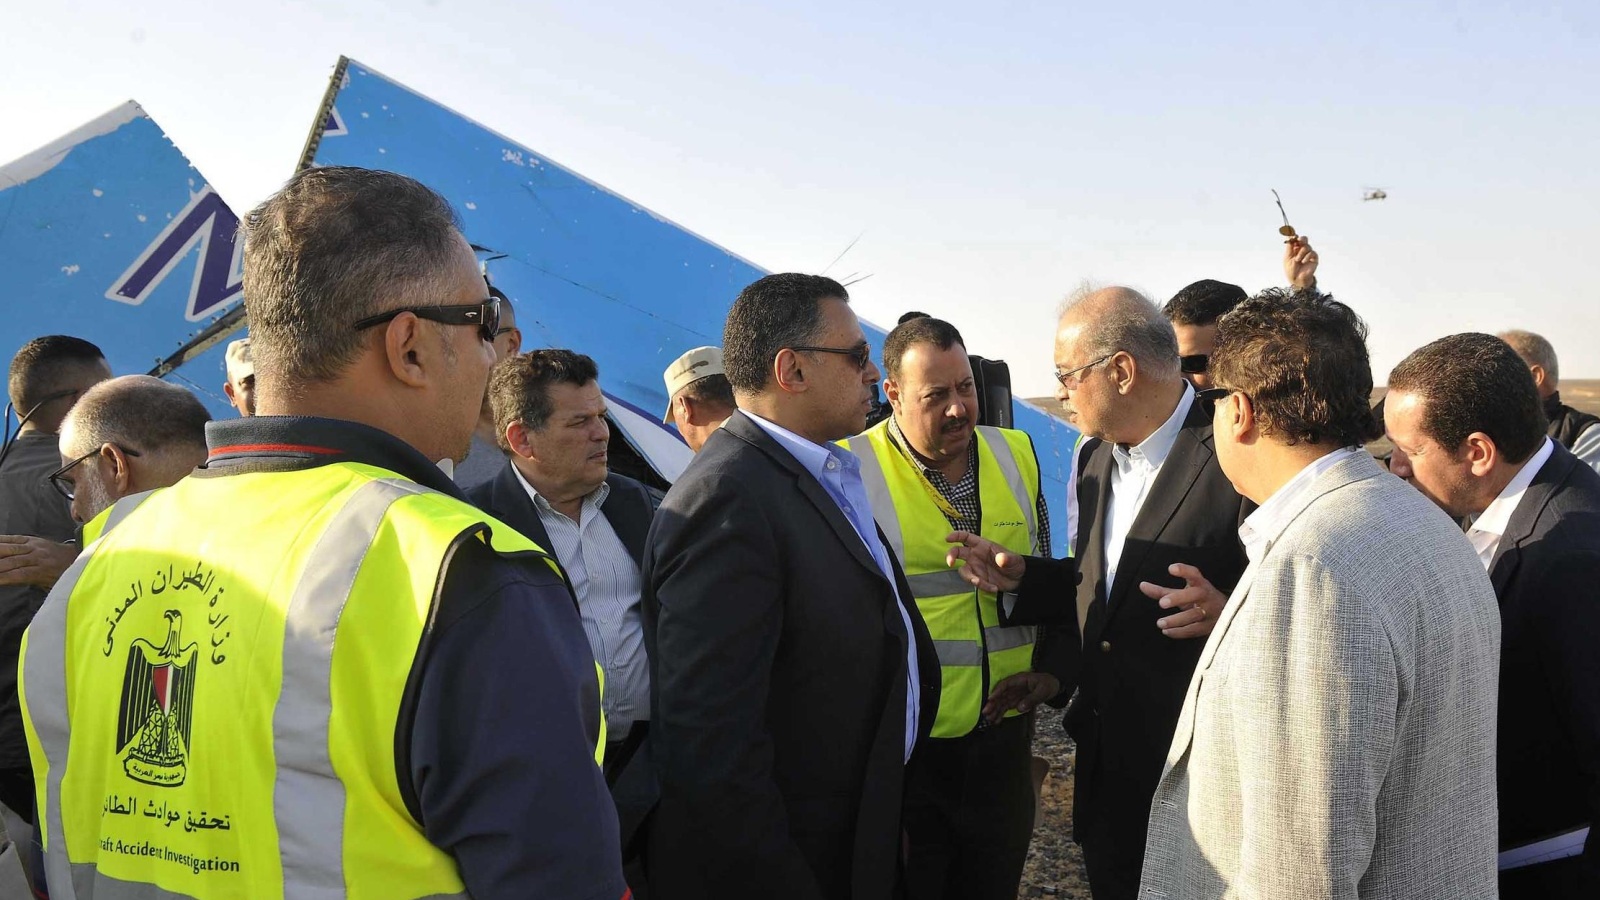 In this image released by the Prime Minister's office, Sherif Ismail, third right, along with military and government officials, visit the site where a passenger plane crashed in Hassana Egypt, Friday, Oct. 31, 2015. A Russian aircraft carrying 224 people, including 17 children, crashed Saturday in a remote mountainous region in the Sinai Peninsula about 20 minutes after taking off from a Red Sea resort popular with Russian tourists, the Egyptian government said. There were no survivors.(Suliman el-Oteify, Egypt Prime Minister's Office via AP)